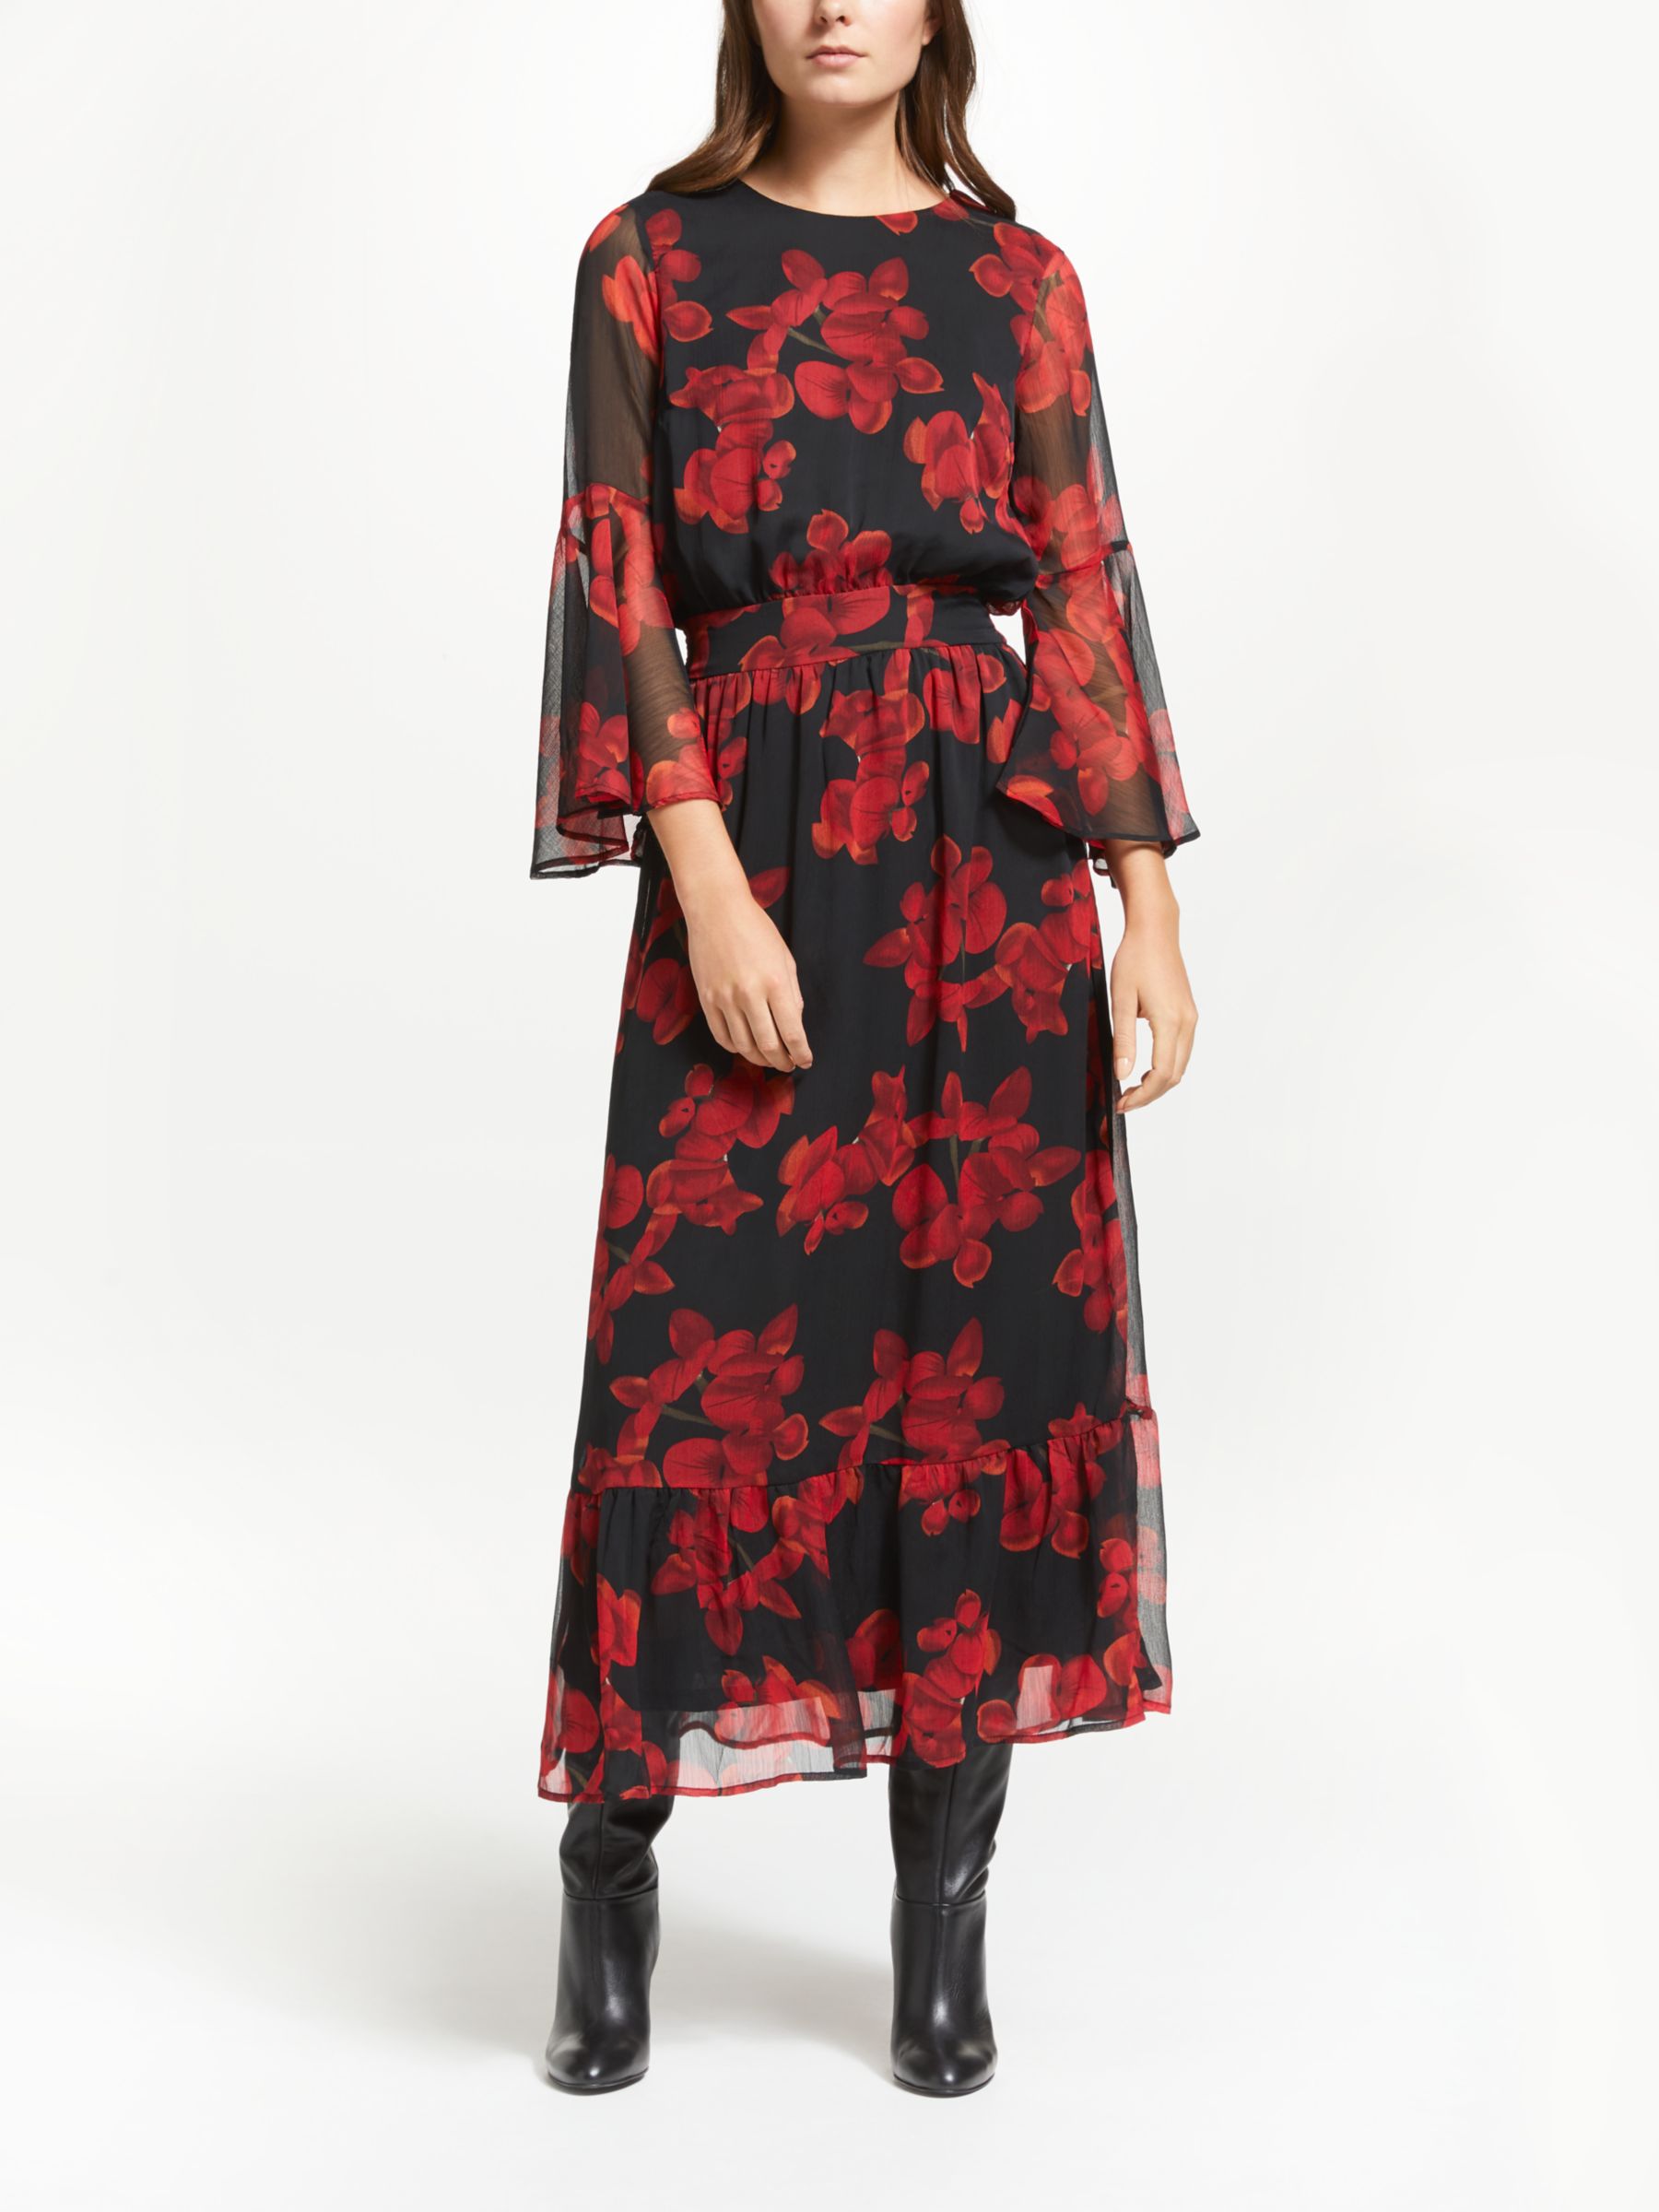 black maxi dress with red flowers